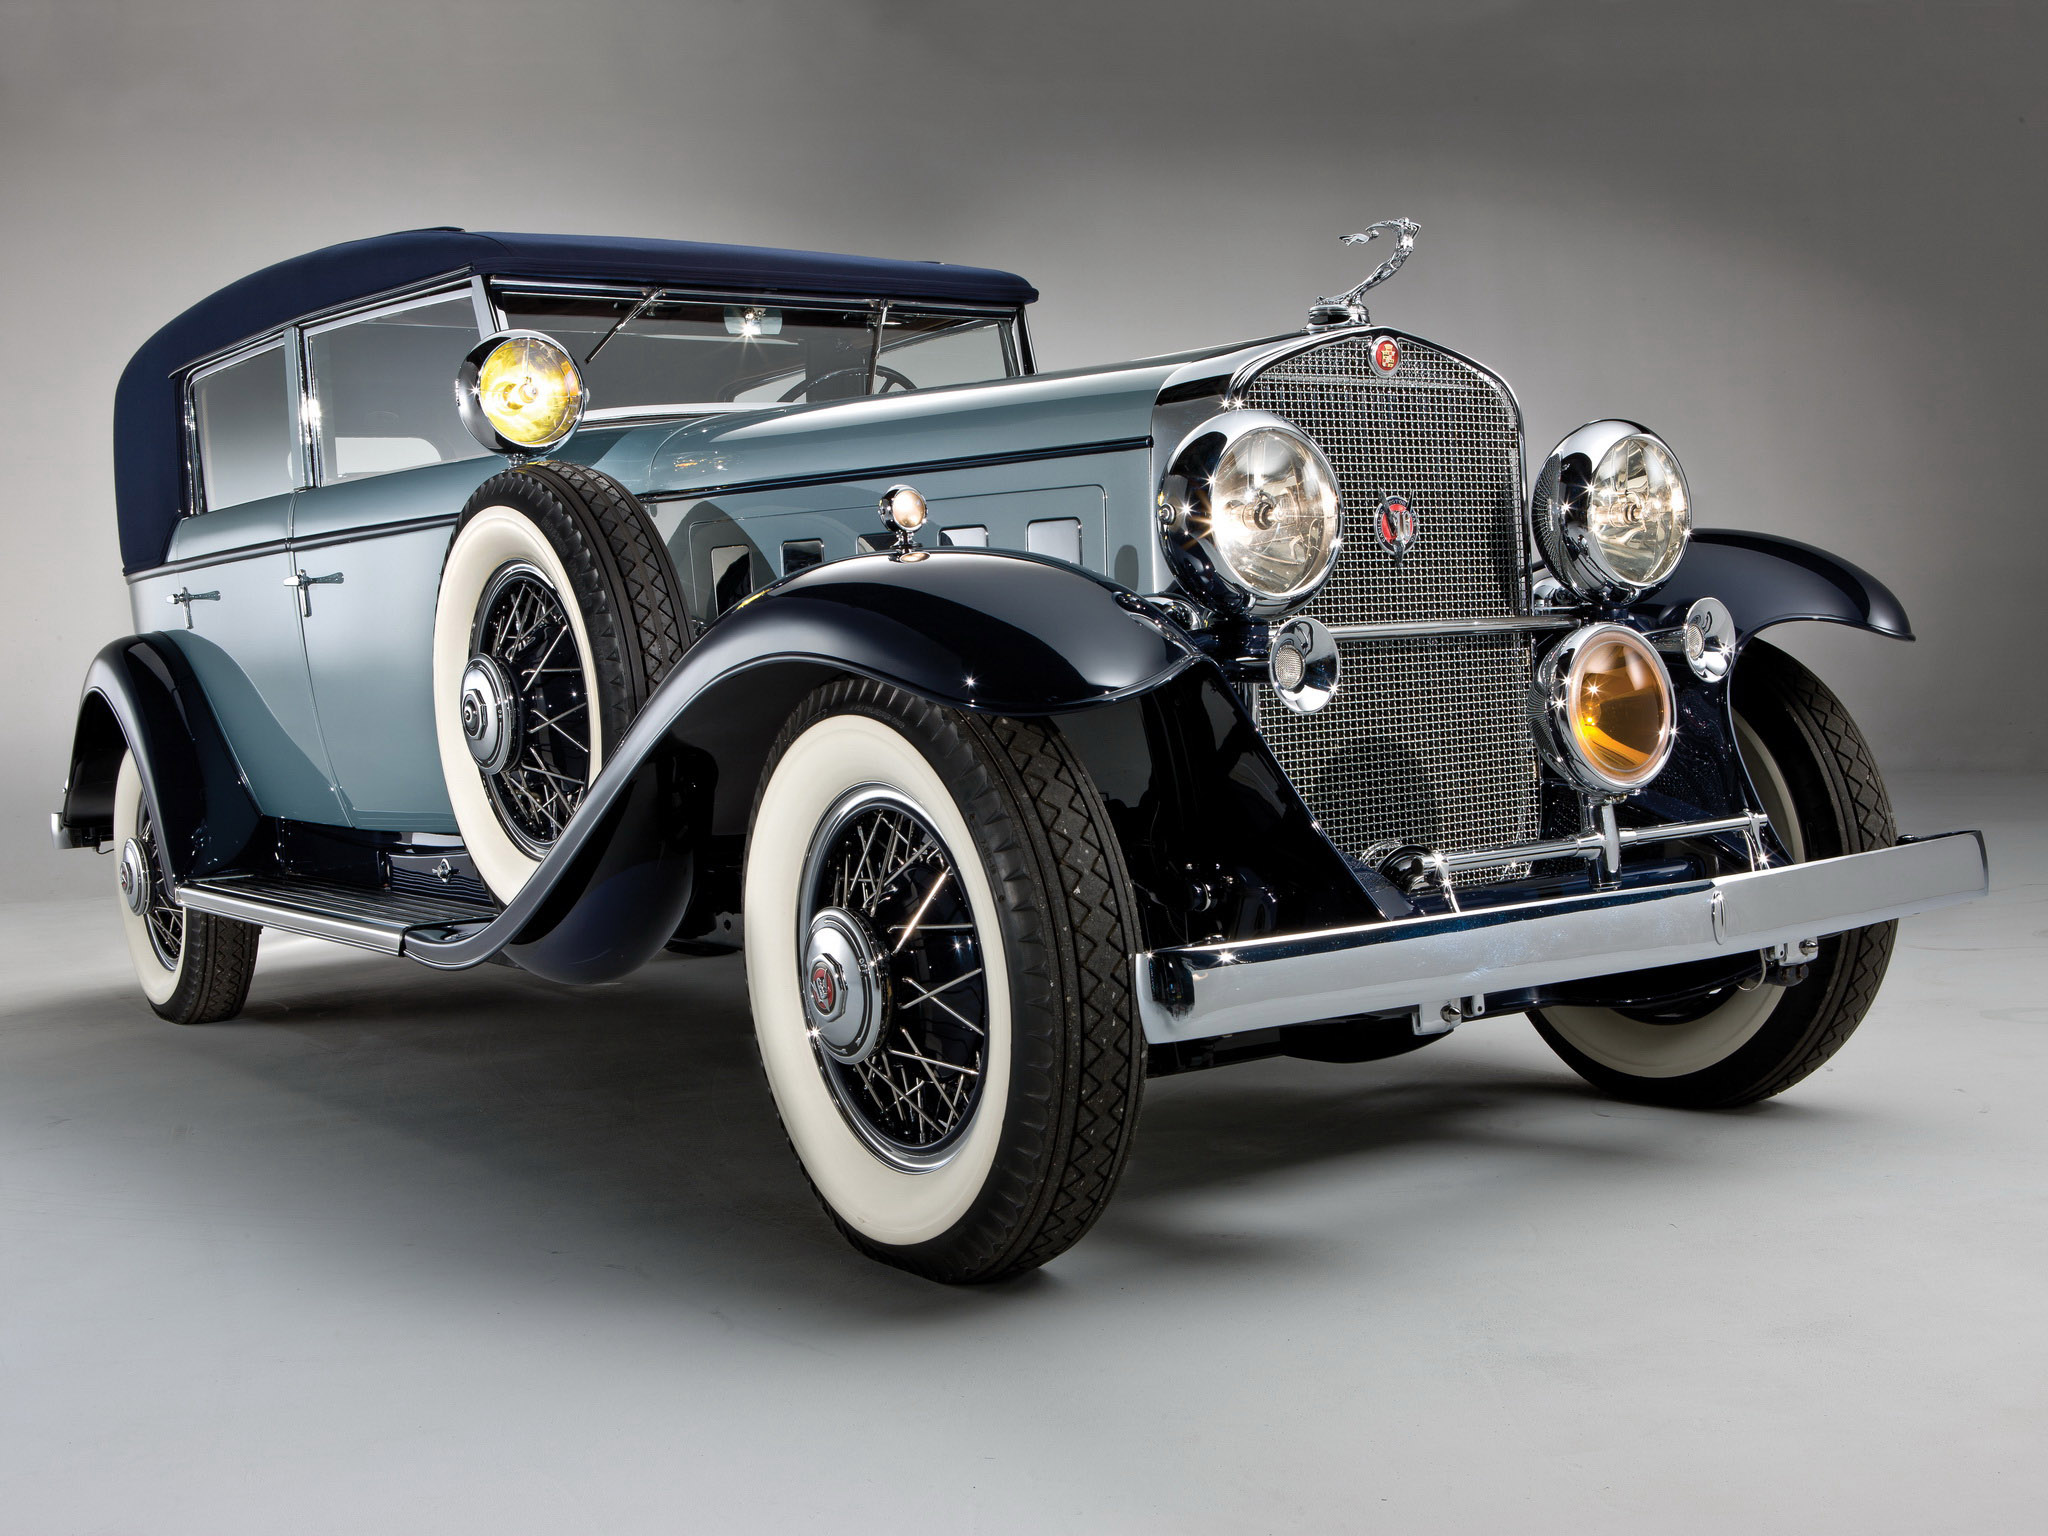 Amazing 1930 Cadillac V-16 Pictures & Backgrounds